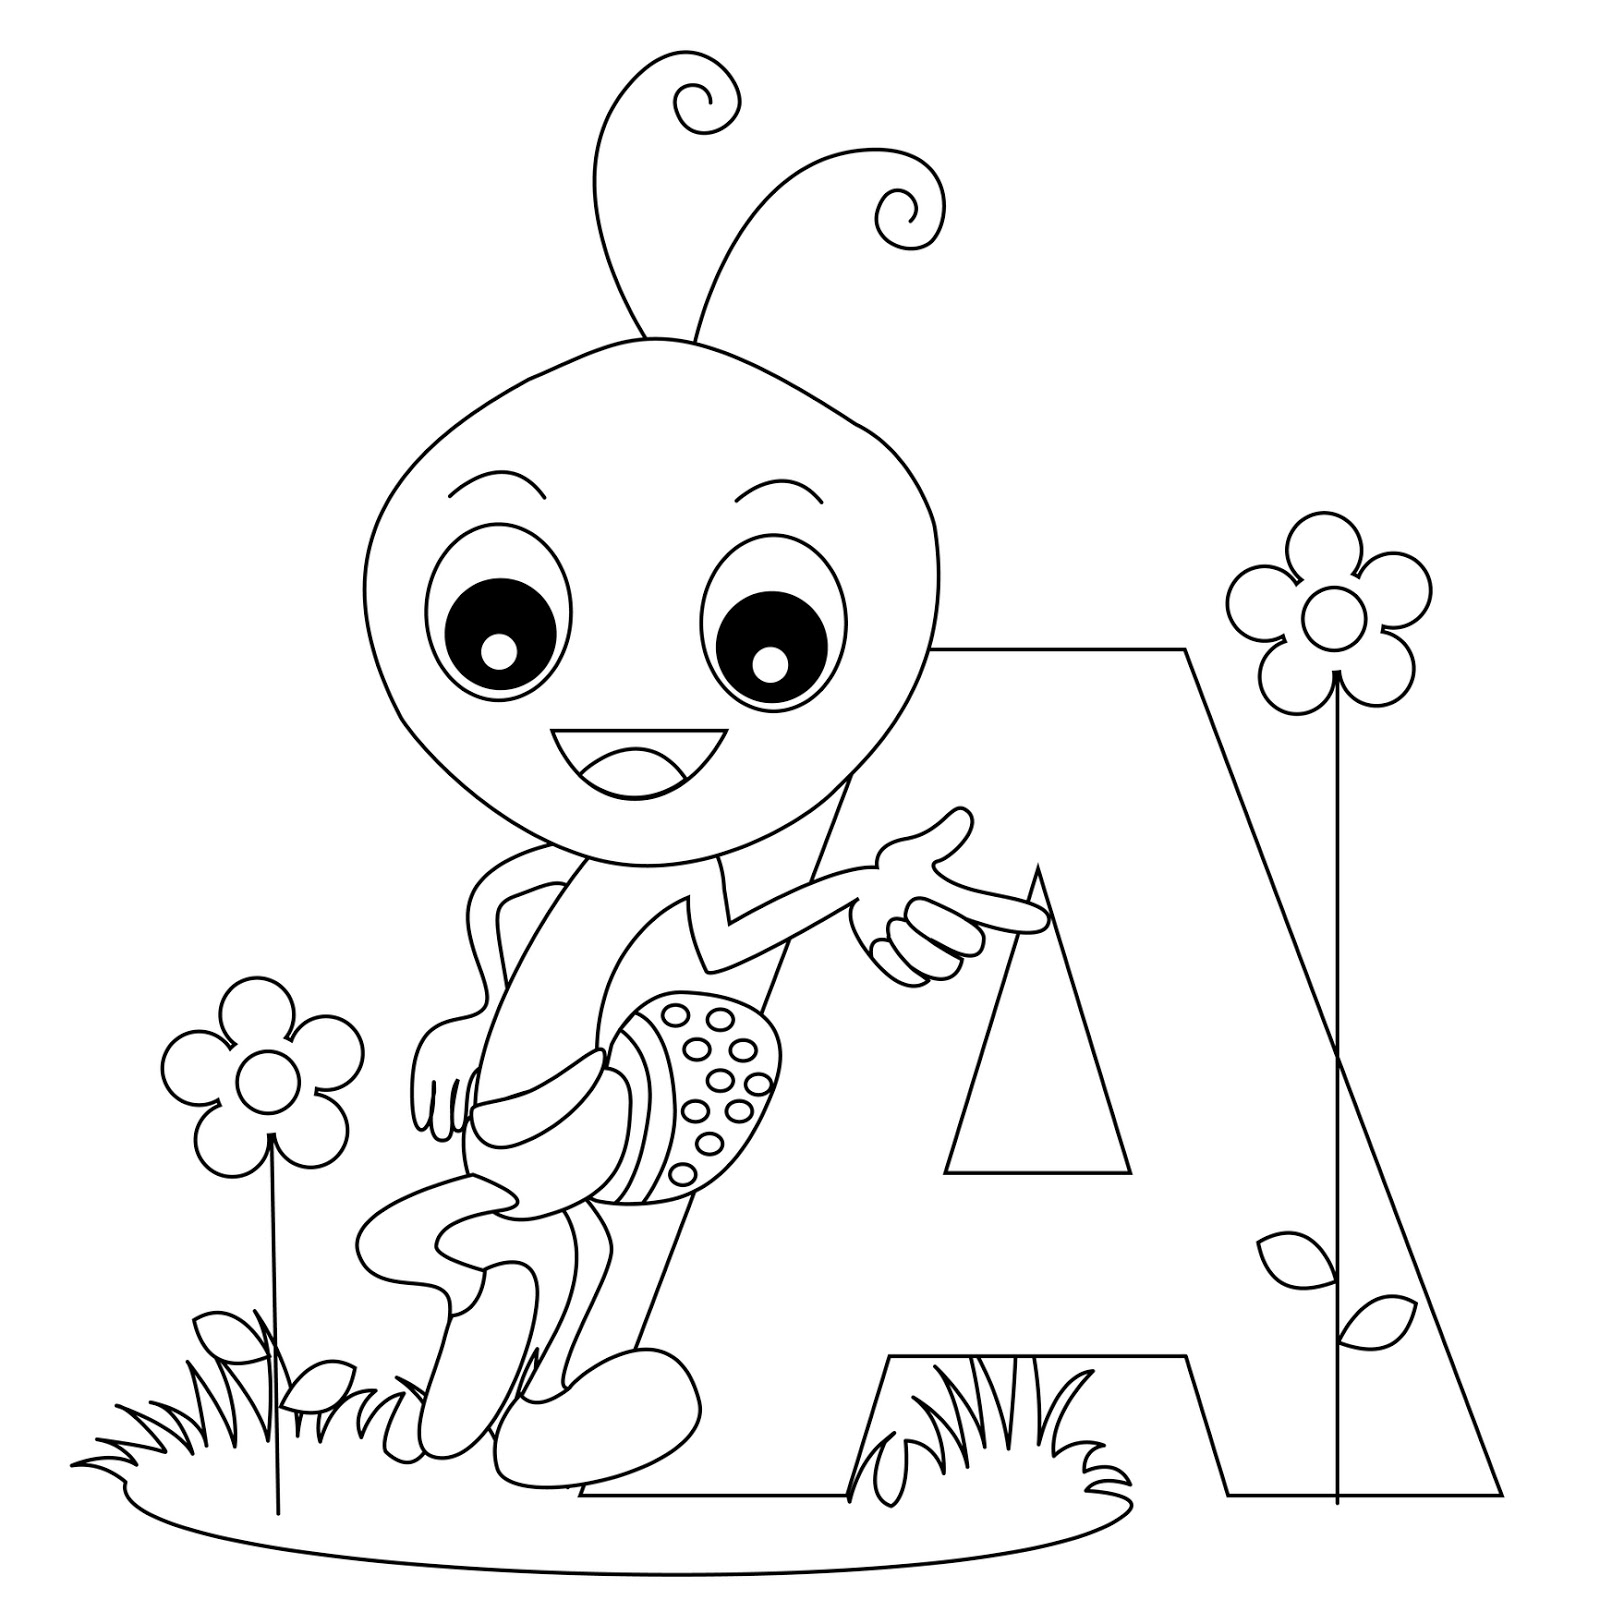 Drawing Alphabet #124600 (Educational) – Printable coloring pages